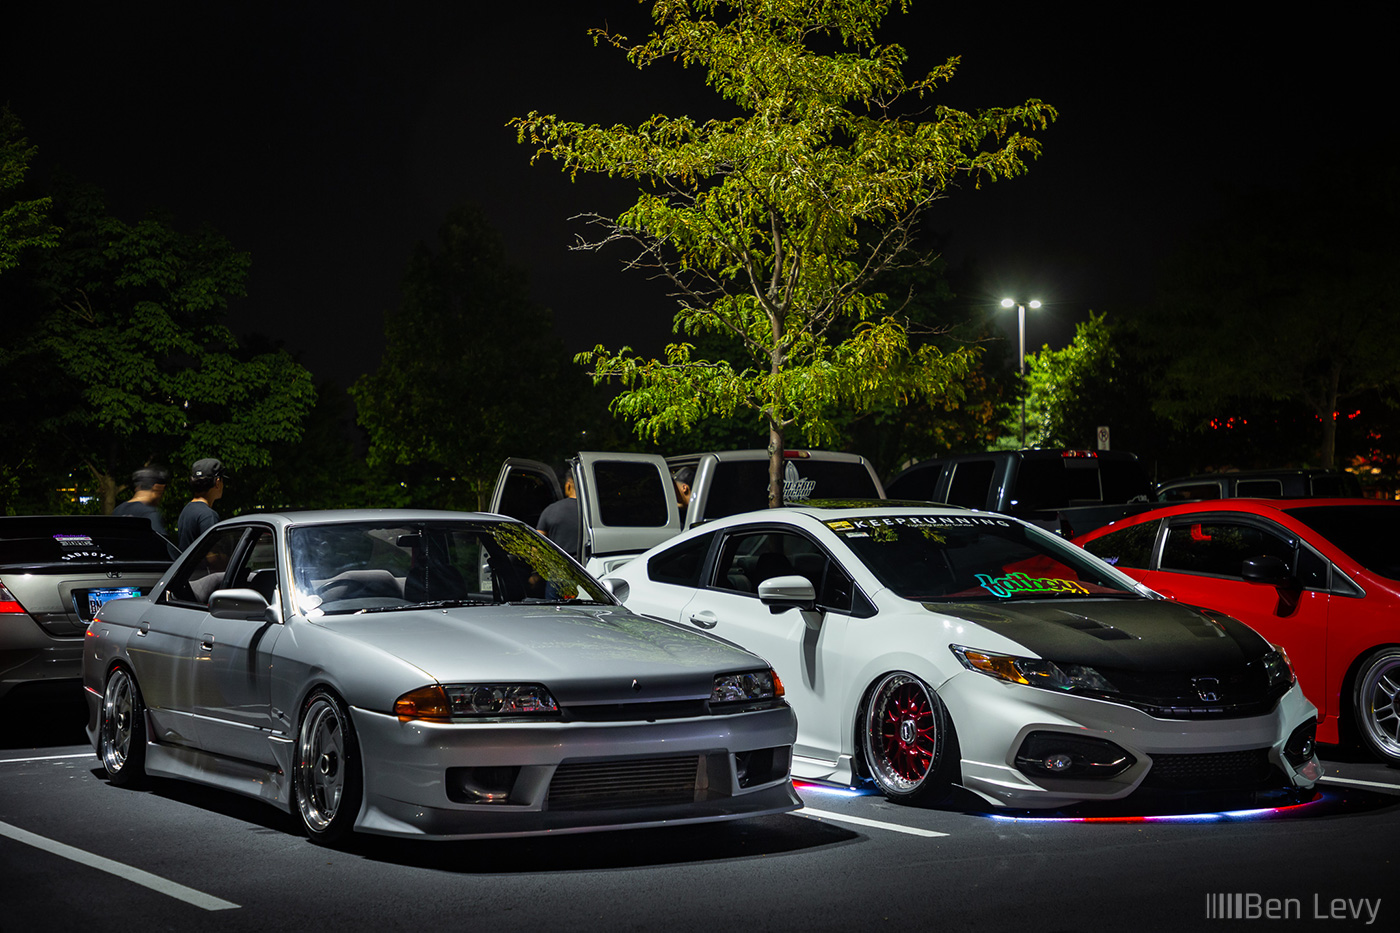 Silver Skyline and White Civic at Car Meet at Night